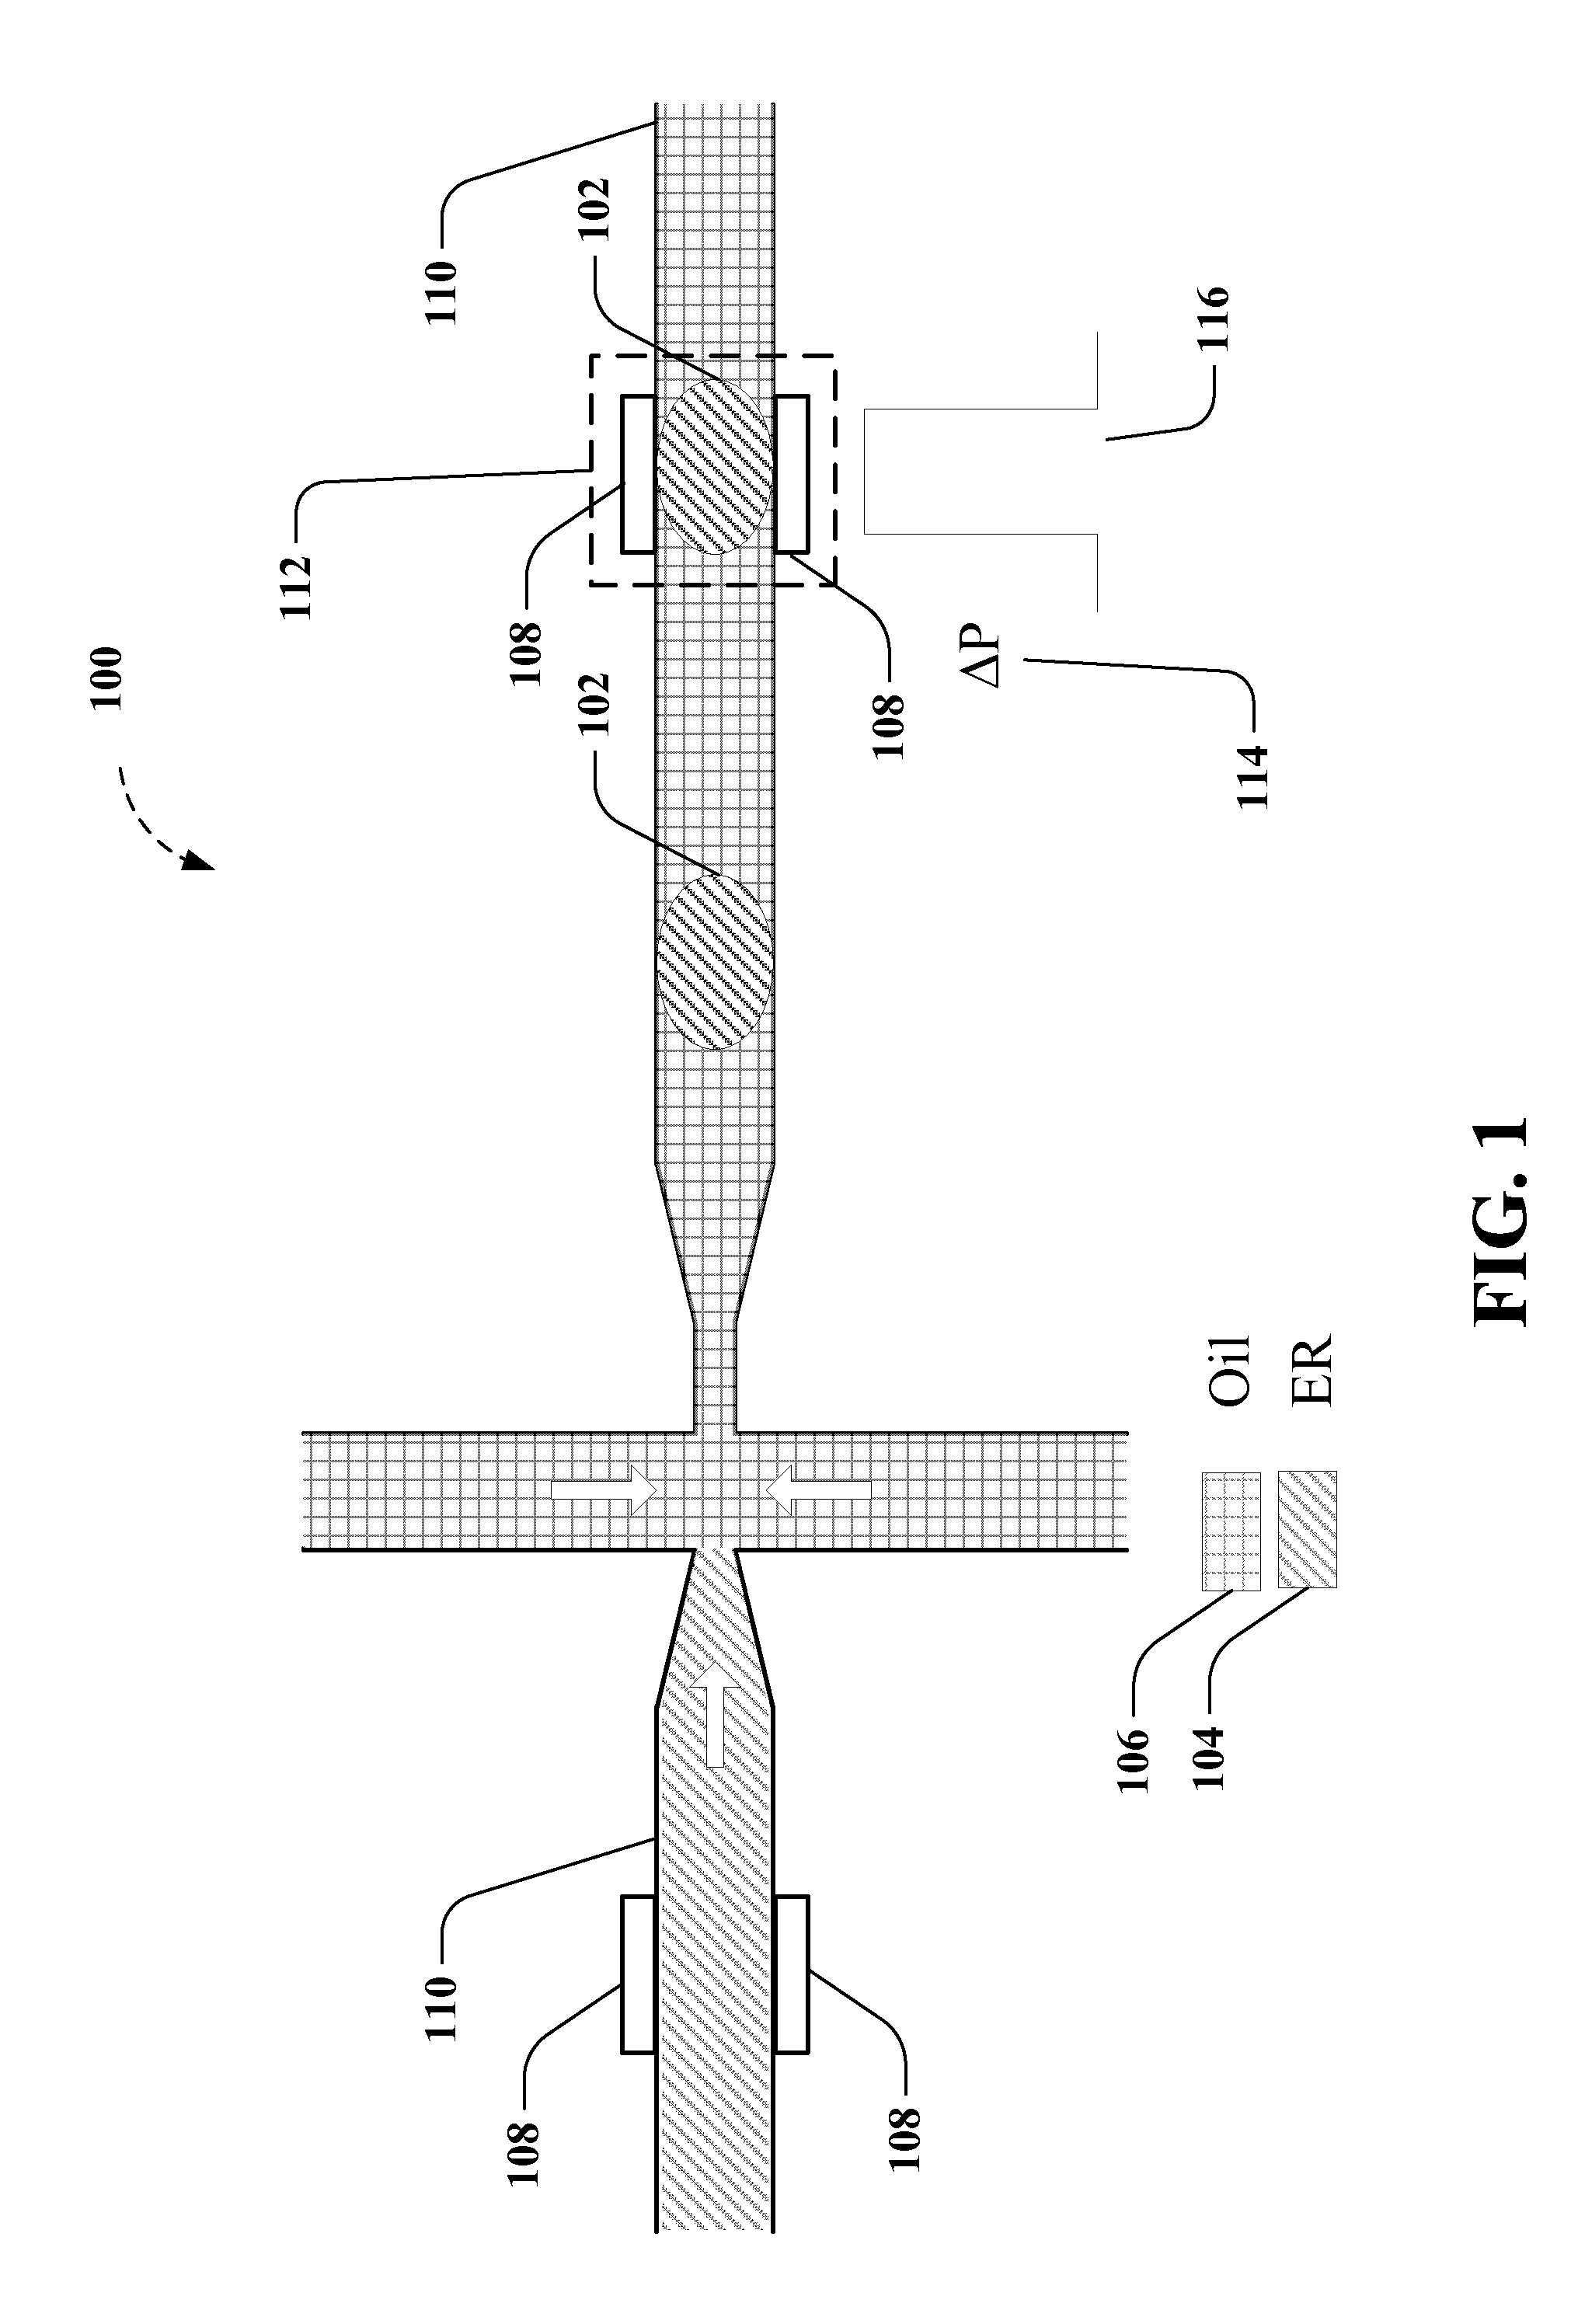 Microfluidic droplet generation and/or manipulation with electrorheological fluid